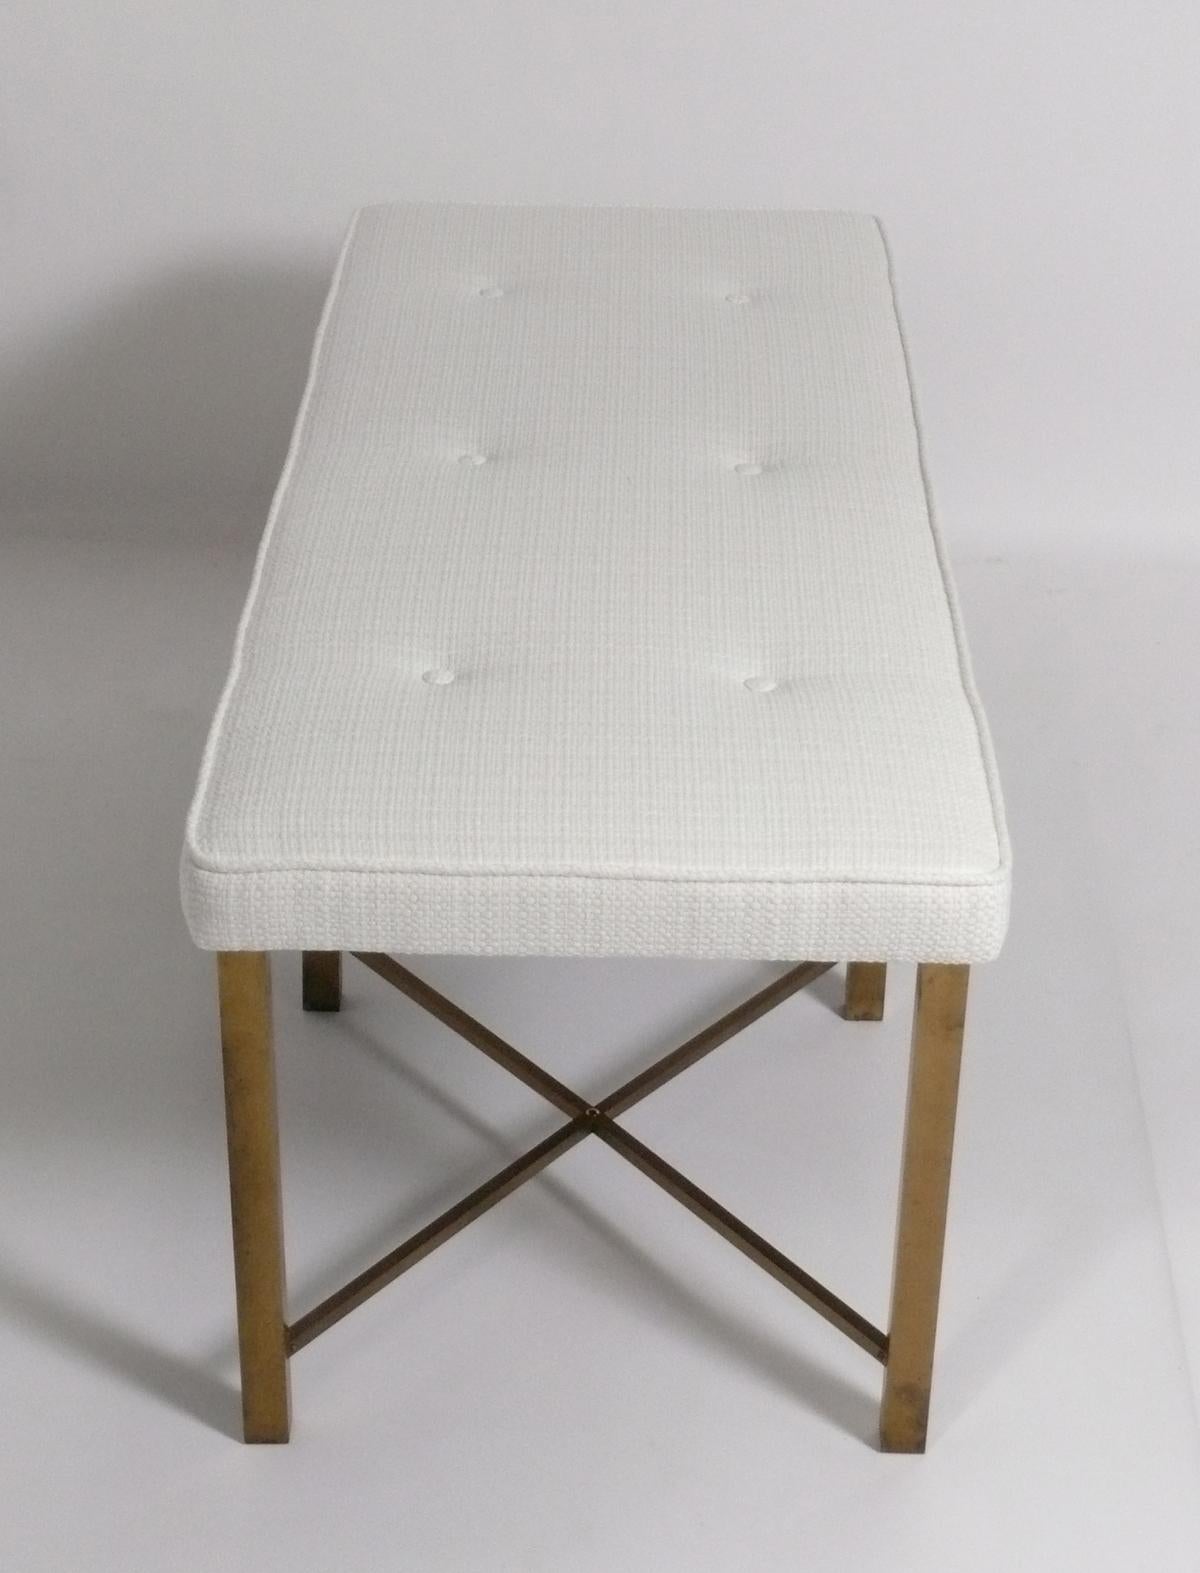 Brass X form bench, American, circa 1950s. This bench has been recently reupholstered in an ivory color boucle fabric. The brass base retains its original warm patina.